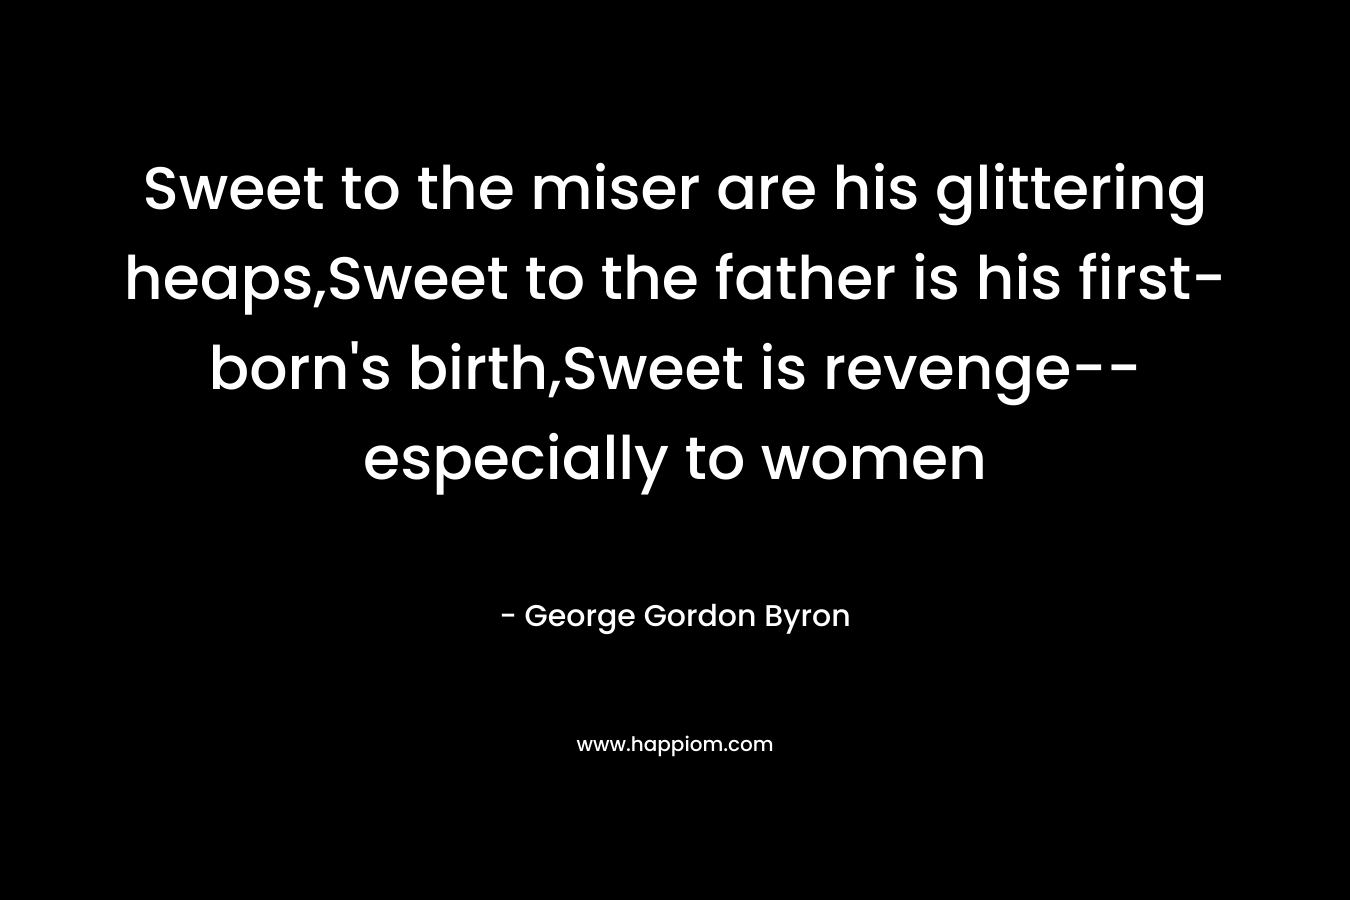 Sweet to the miser are his glittering heaps,Sweet to the father is his first-born's birth,Sweet is revenge--especially to women